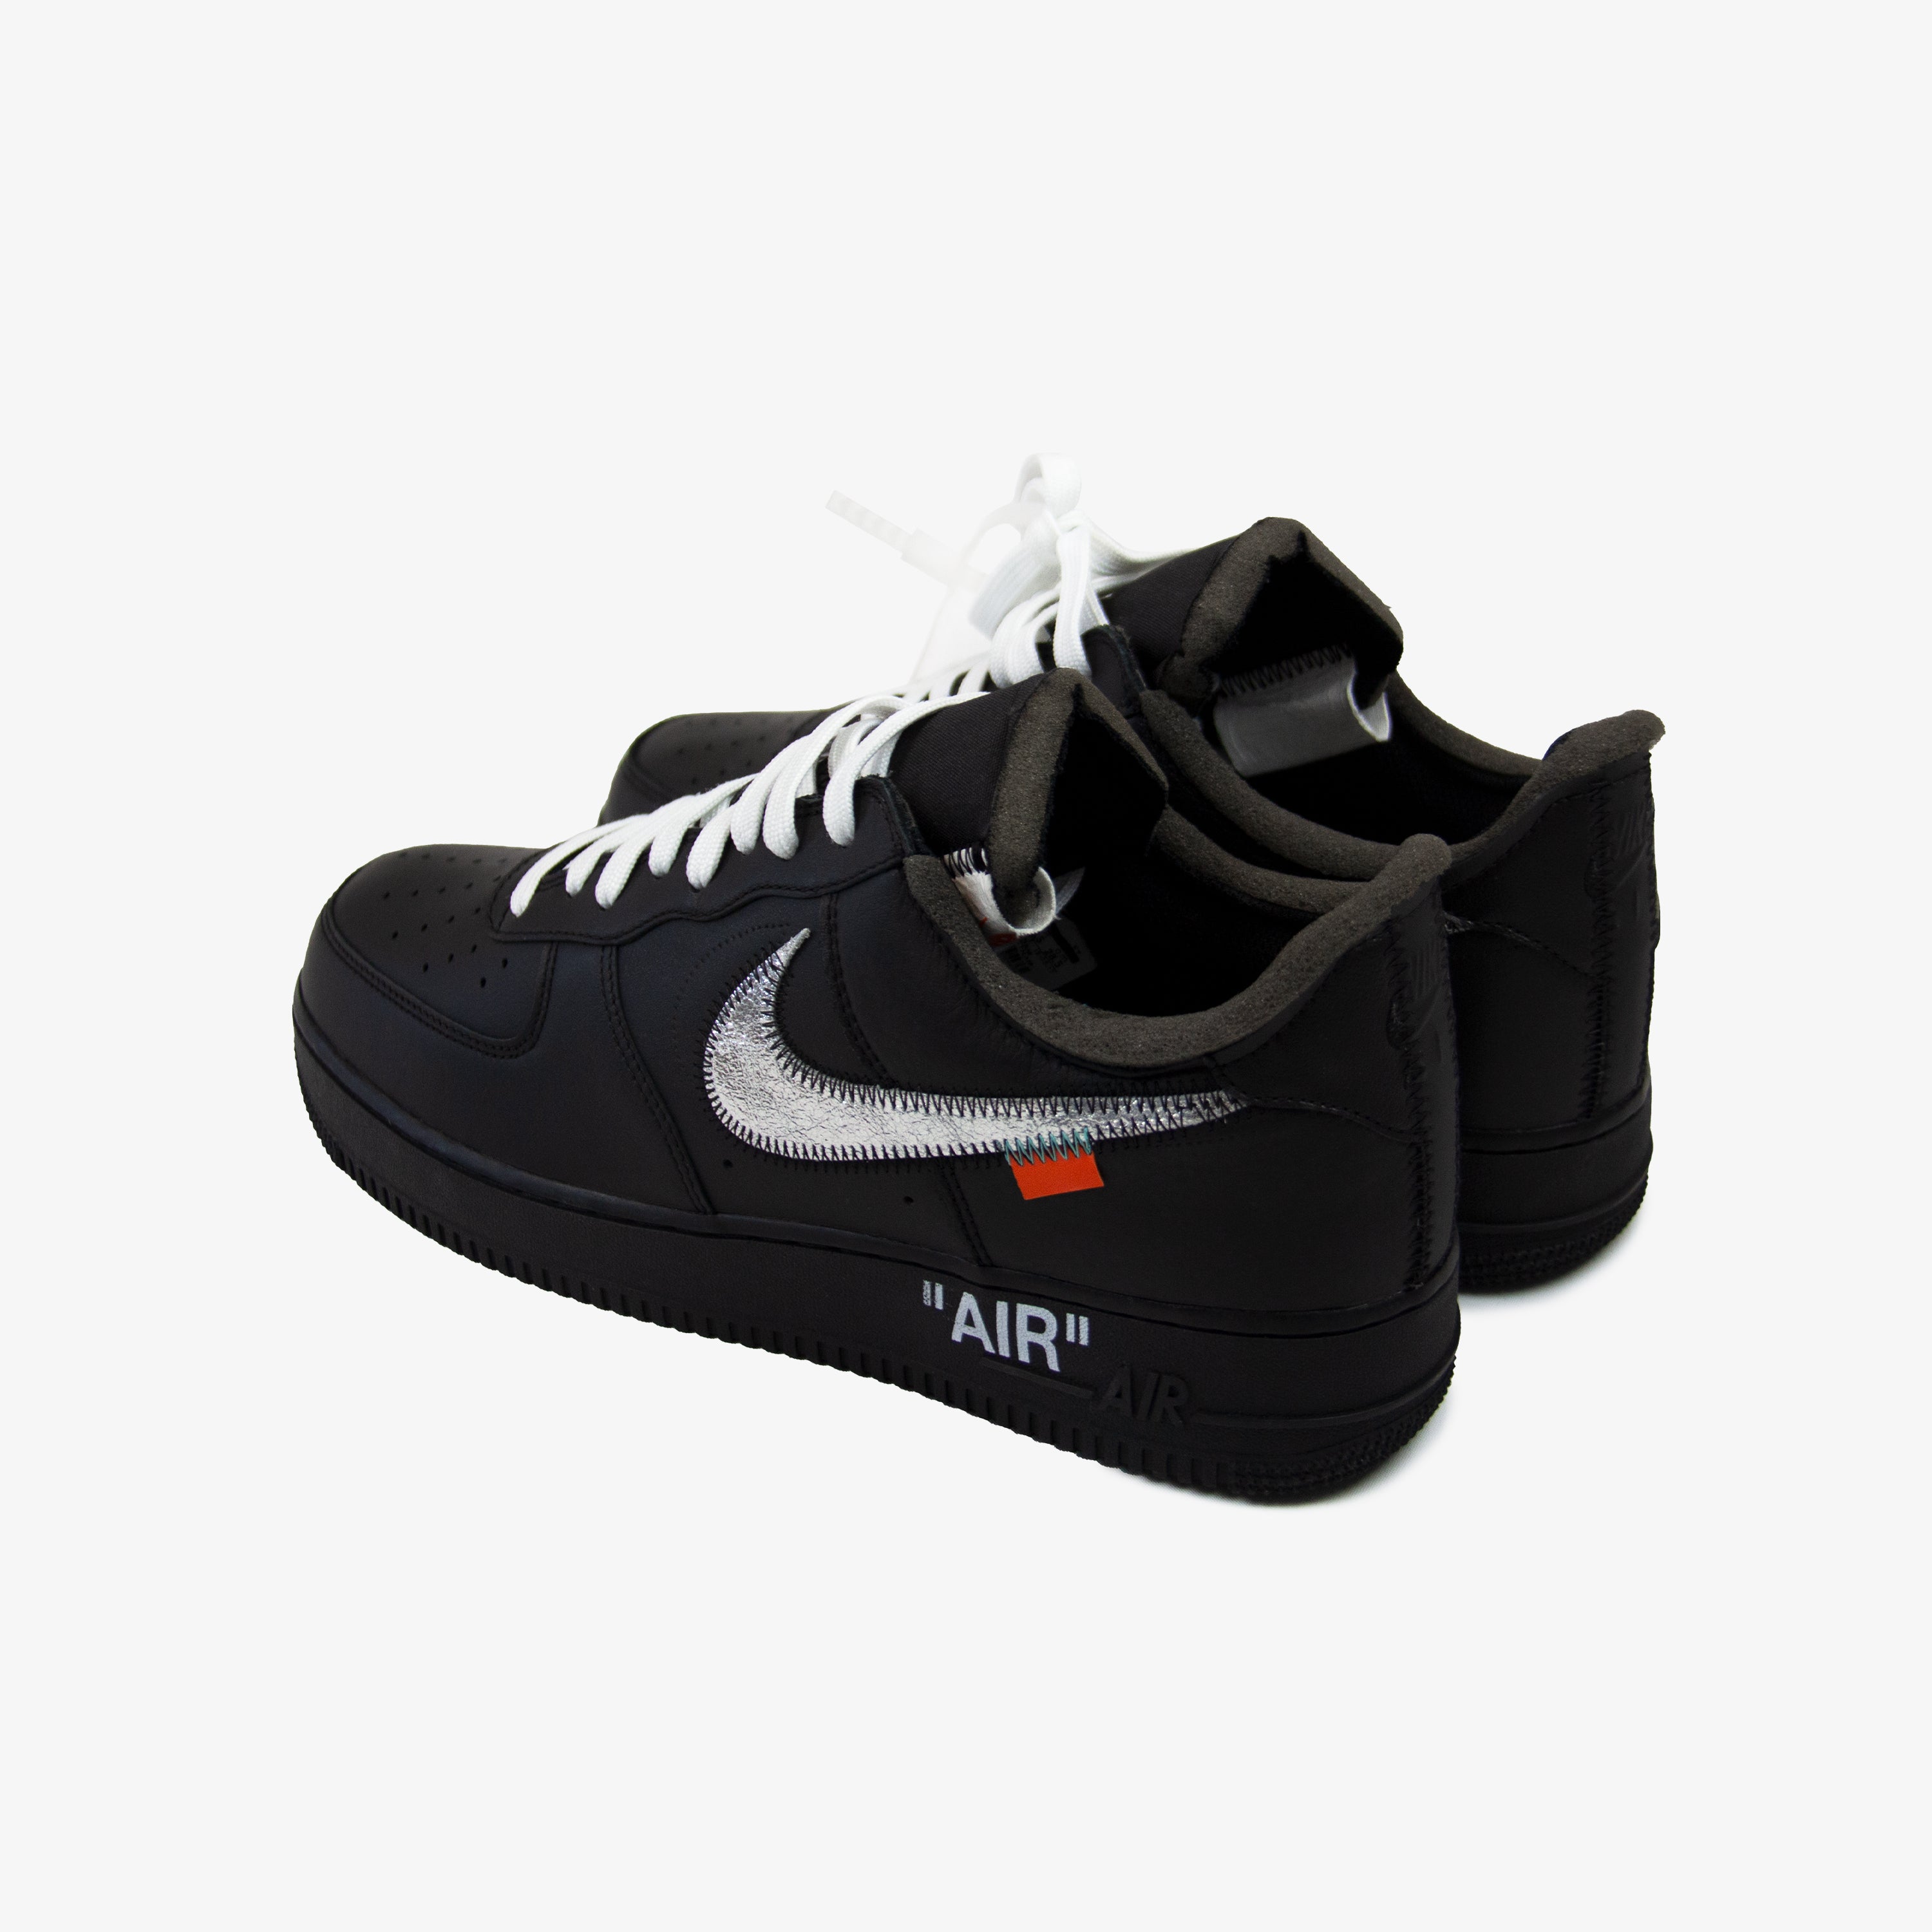 Off White Nike Air Force 1 MoMA Official Images